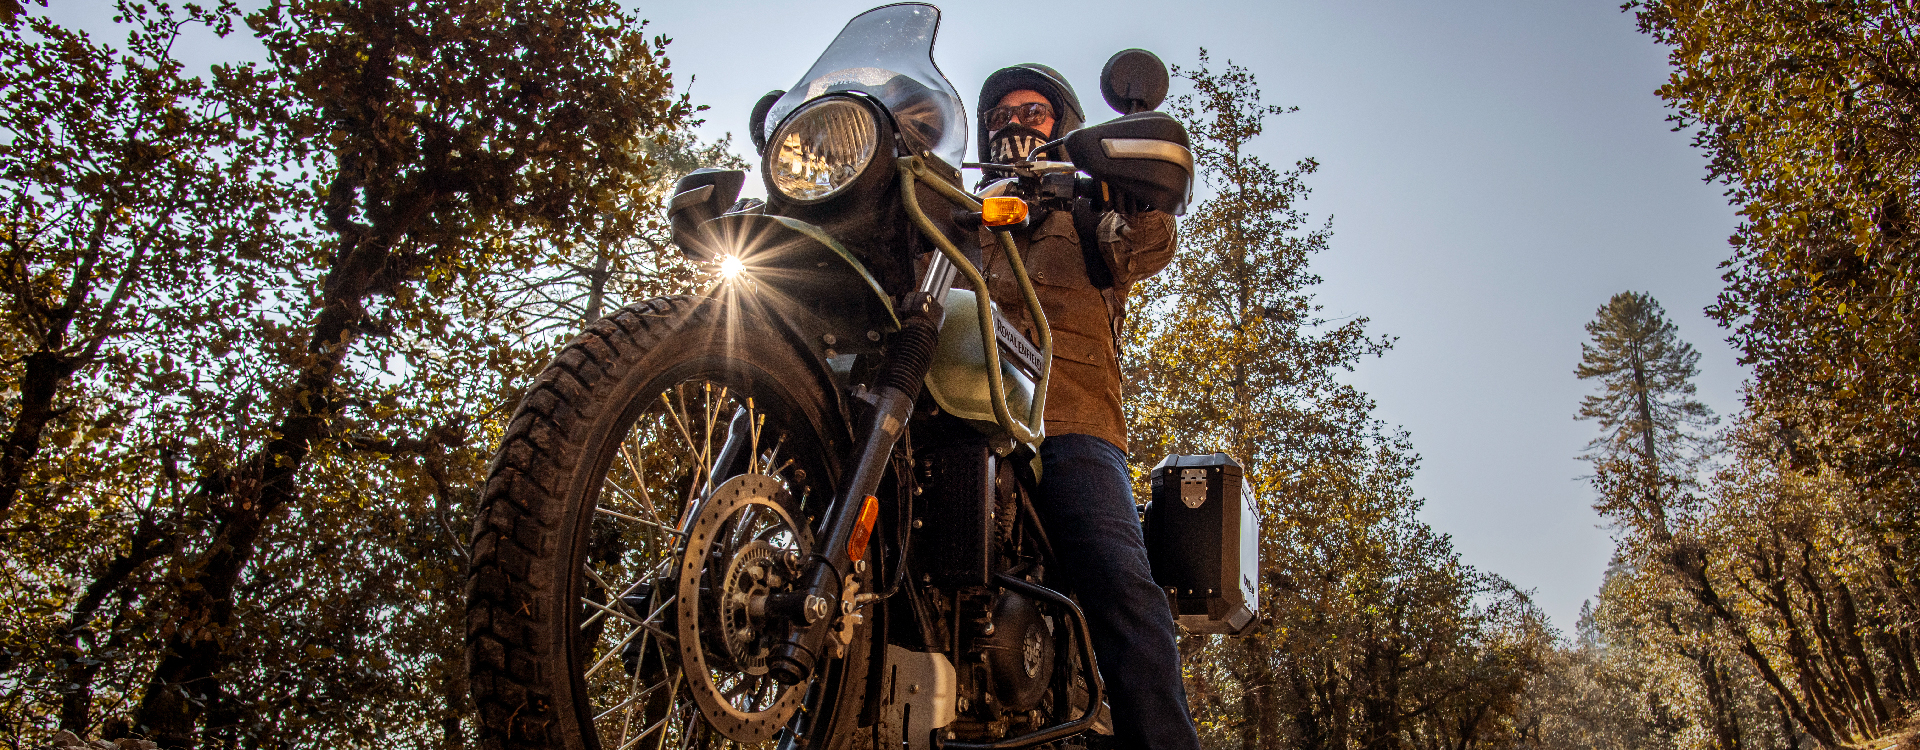 Royal Enfield Himalayan: Rugged, all-terrain adventure bike with a stripped-back design